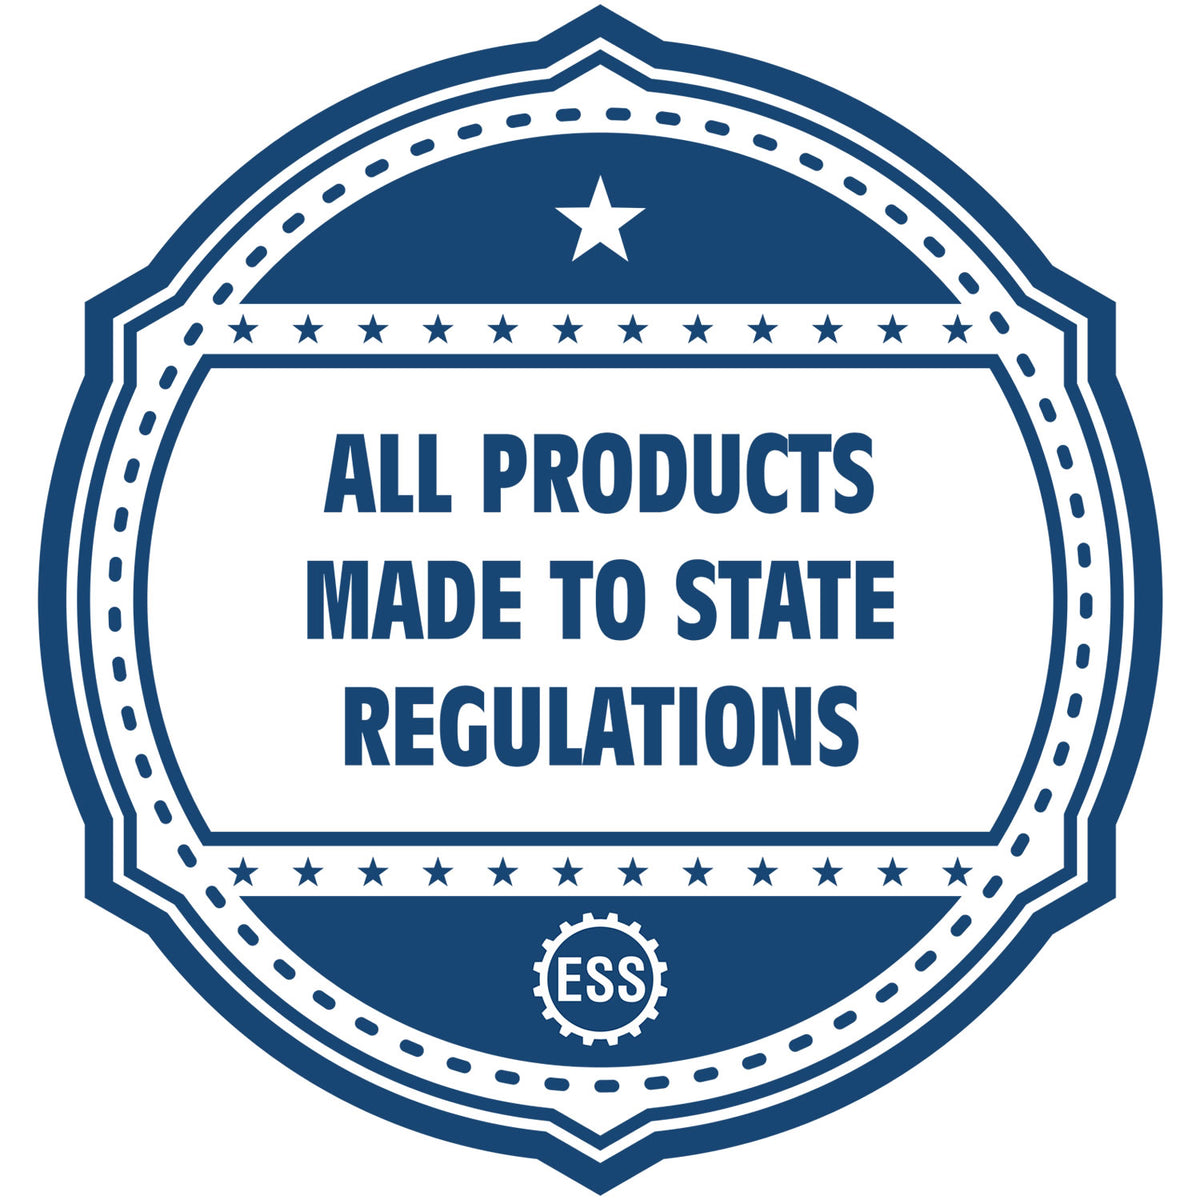 An icon or badge element for the Wooden Handle Puerto Rico Rectangular Notary Public Stamp showing that this product is made in compliance with state regulations.